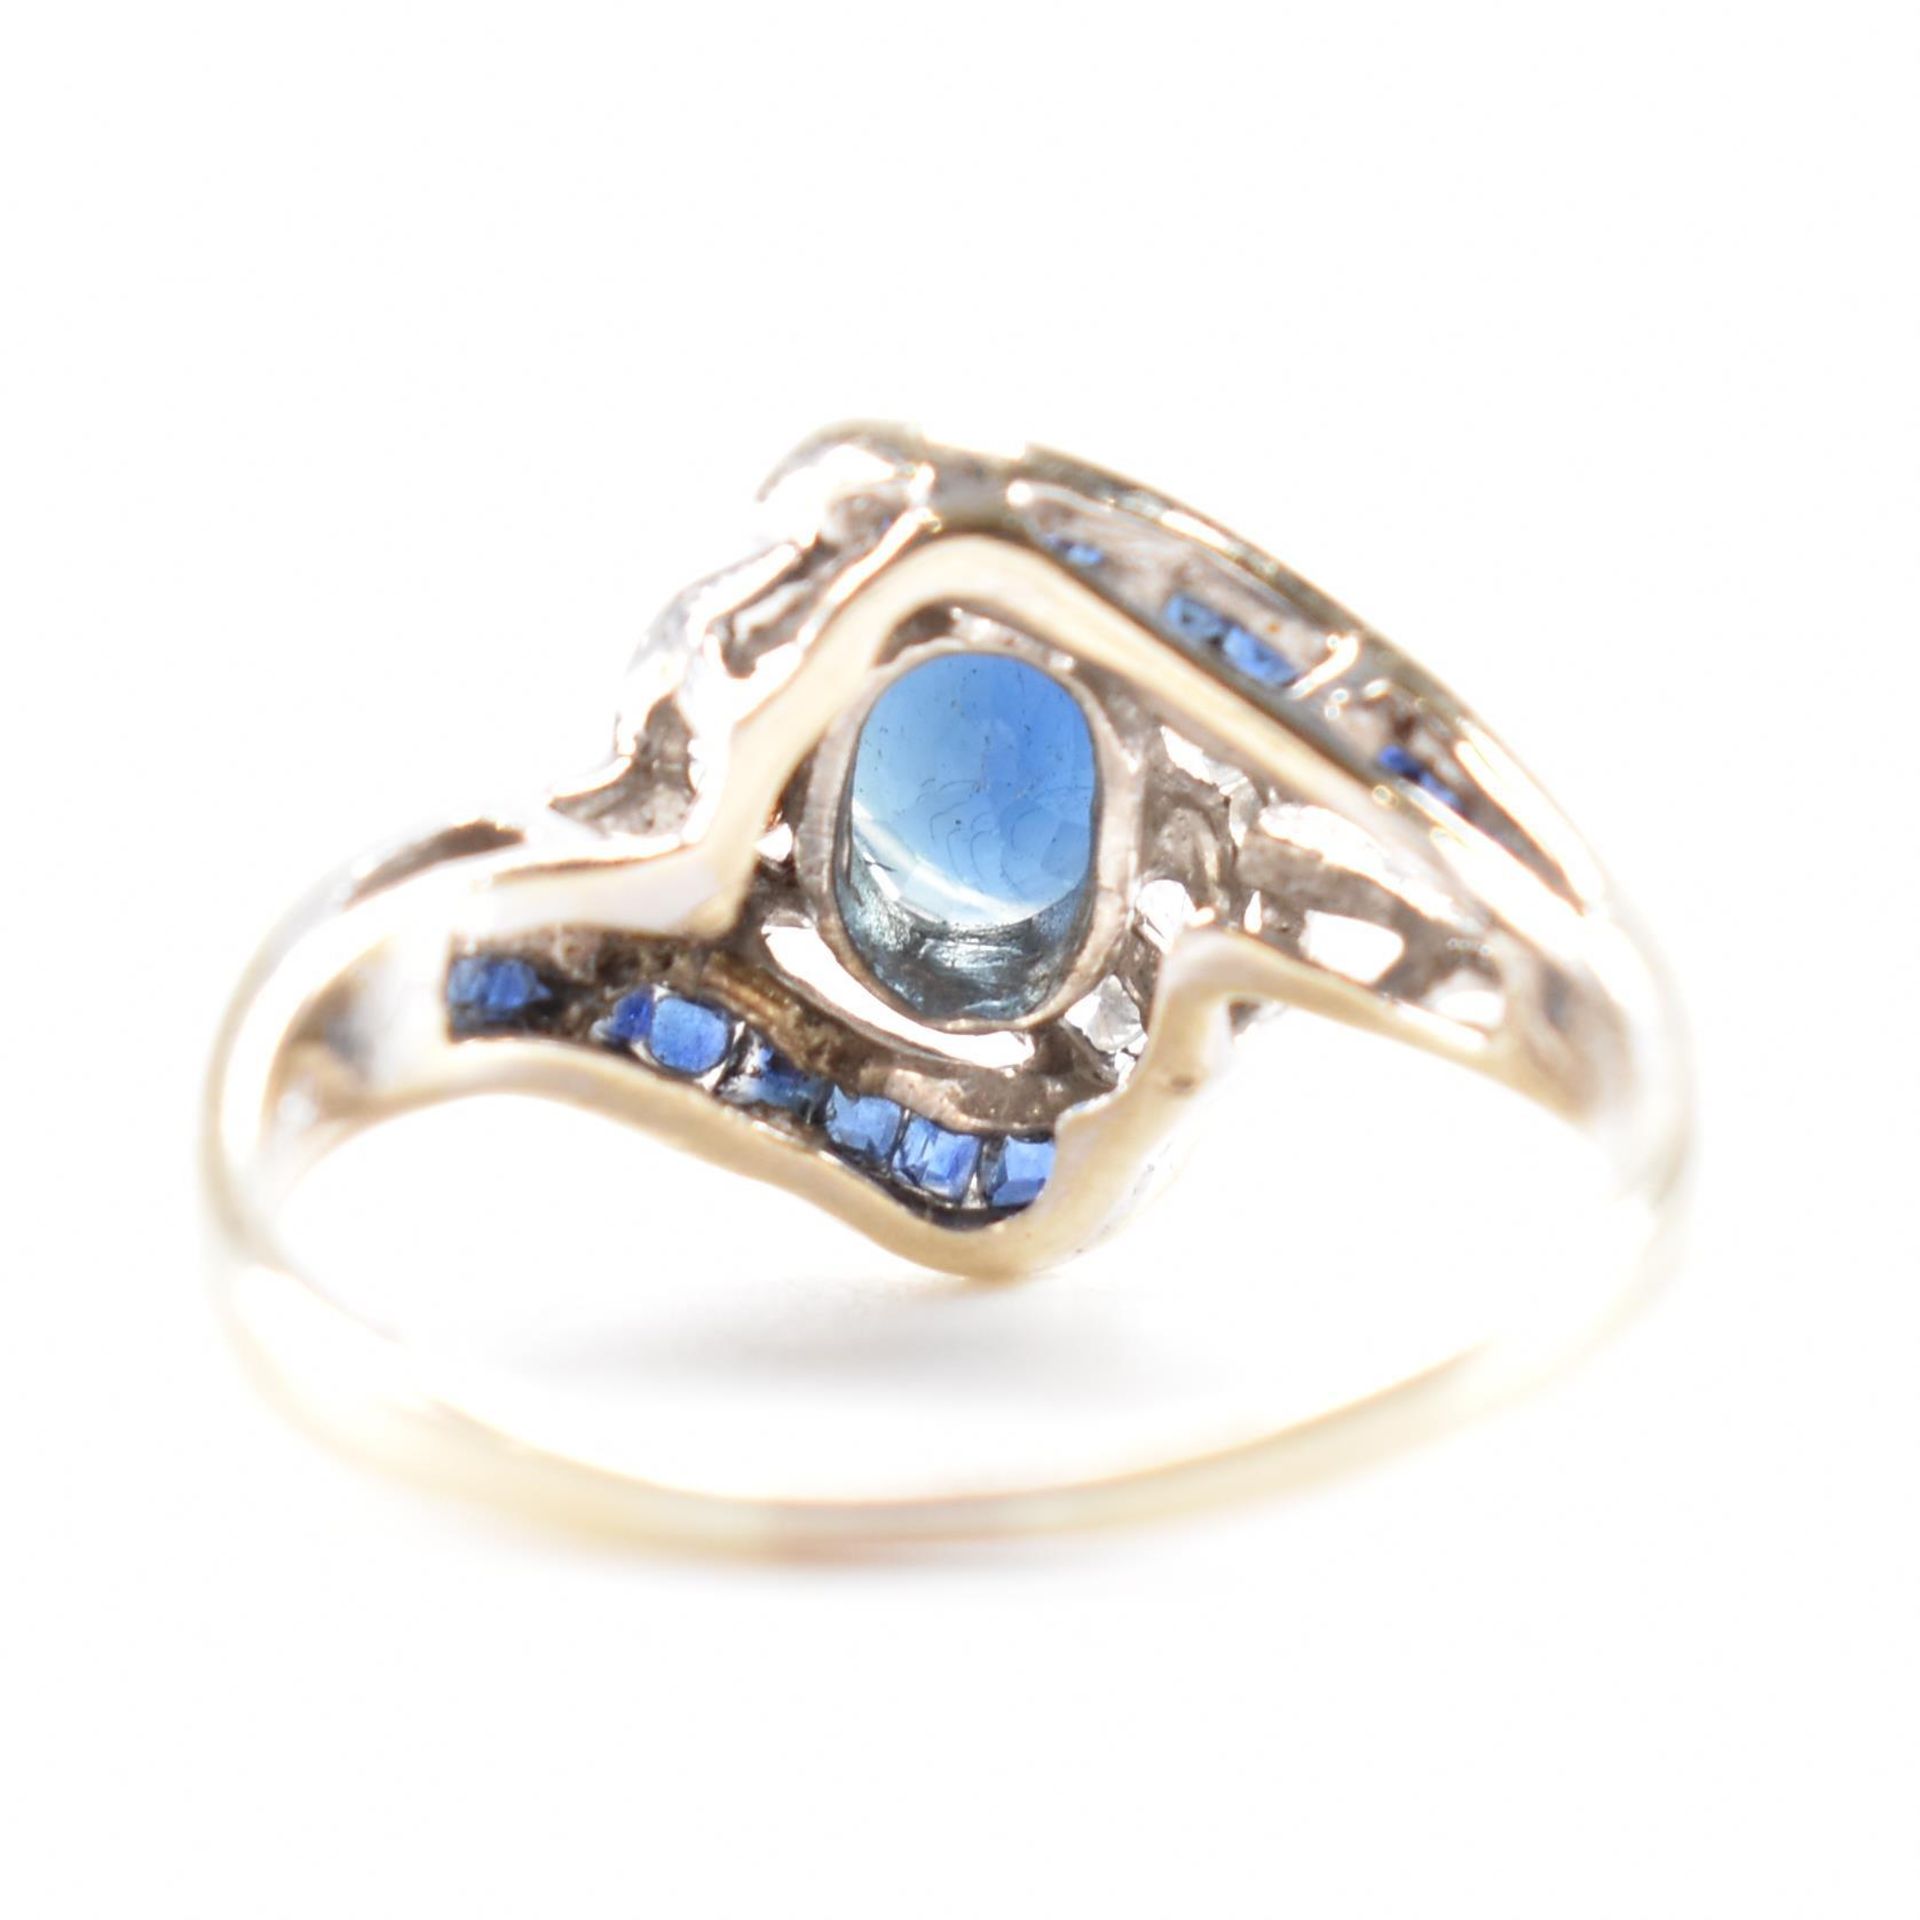 WHITE GOLD SAPPHIRE & DIAMOND CROSSOVER RING - Image 5 of 11